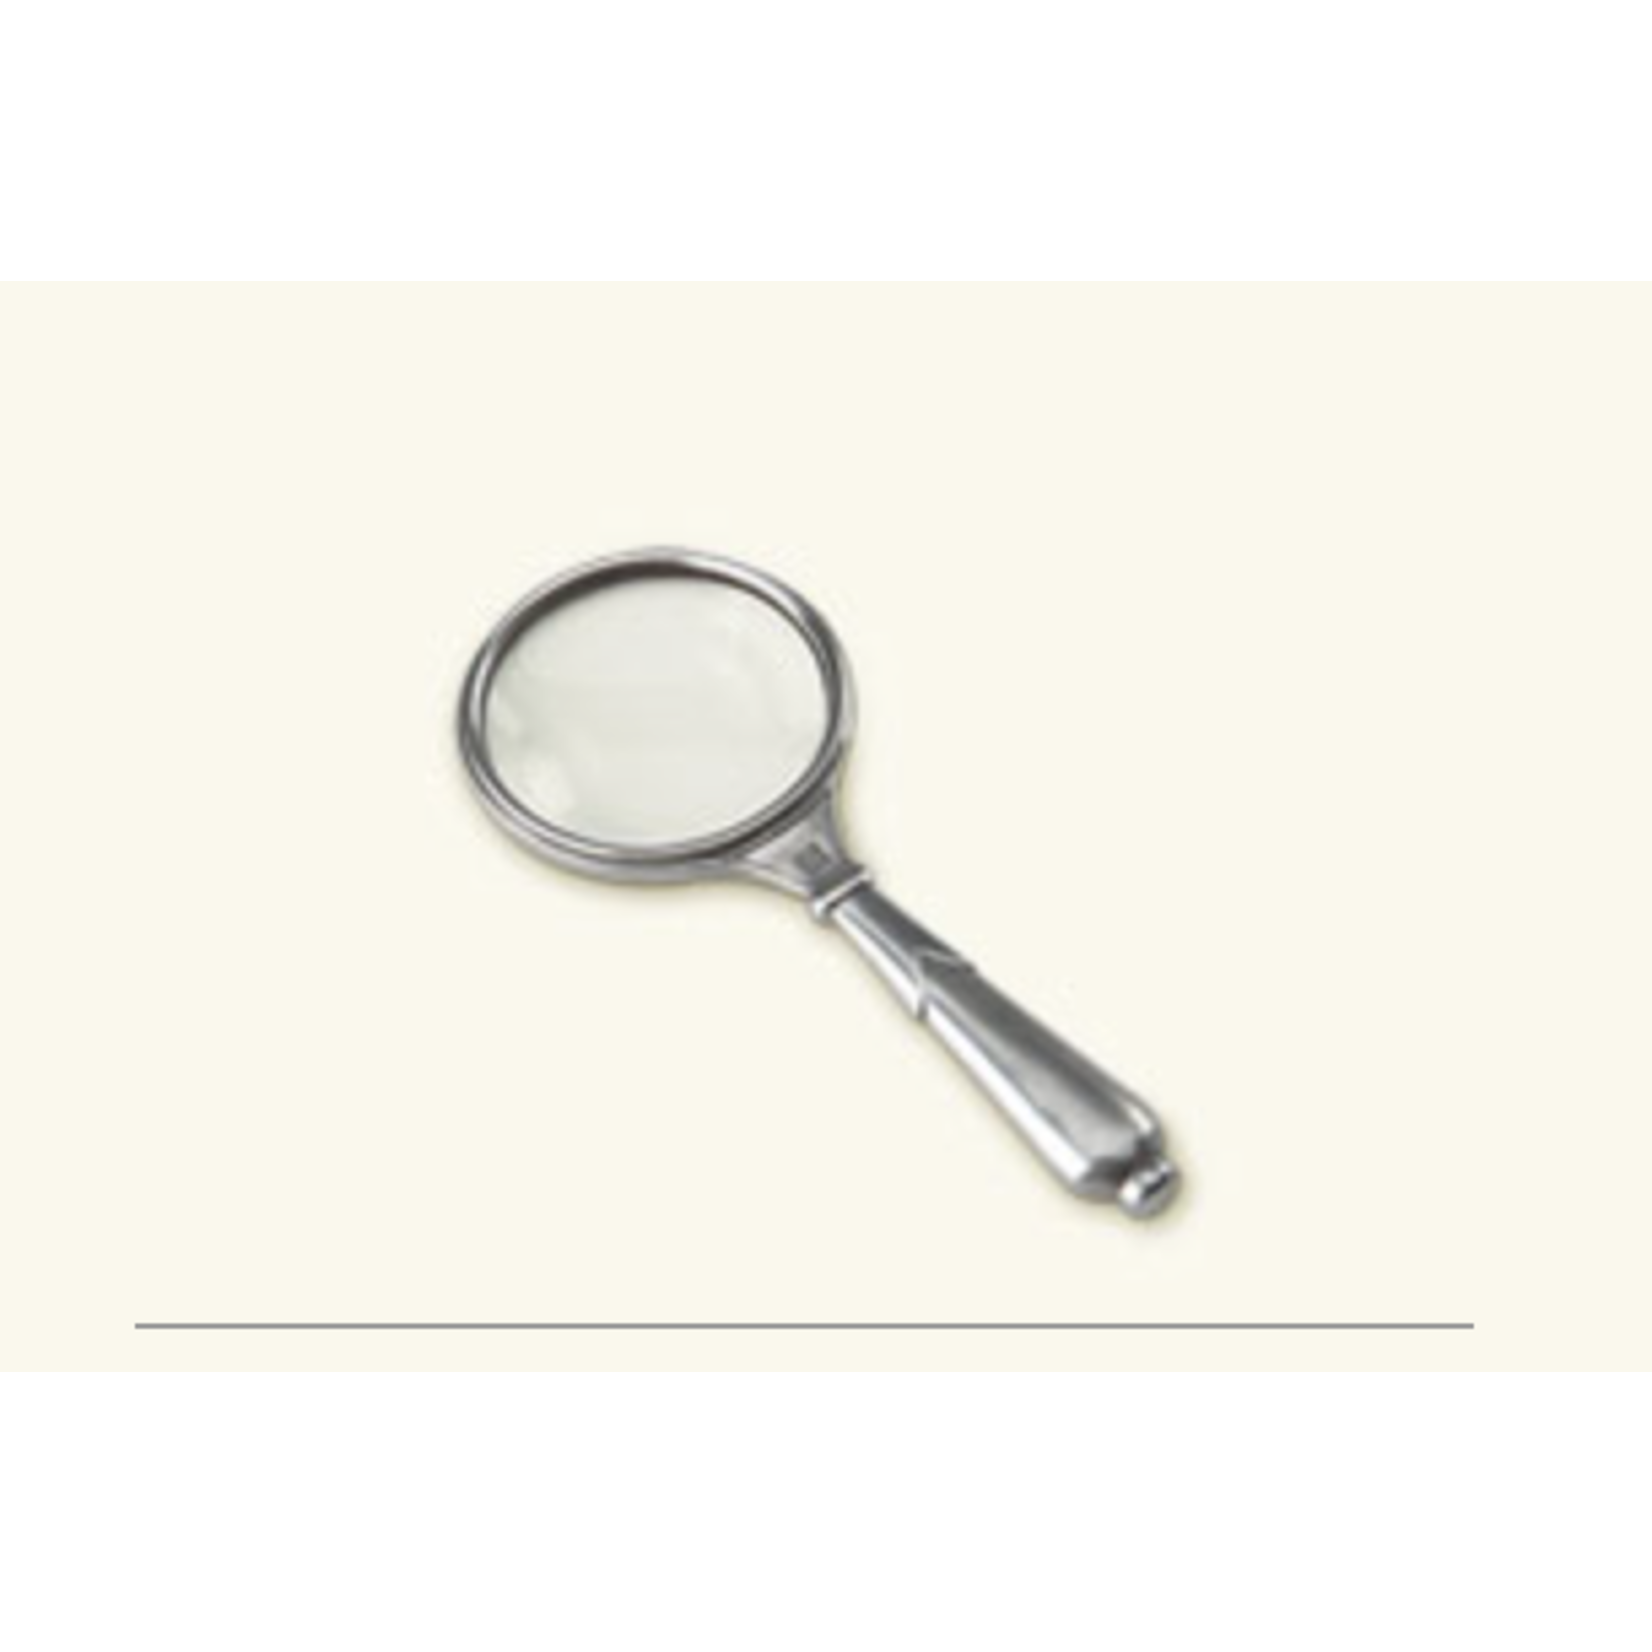 Magnifying Glass by Match